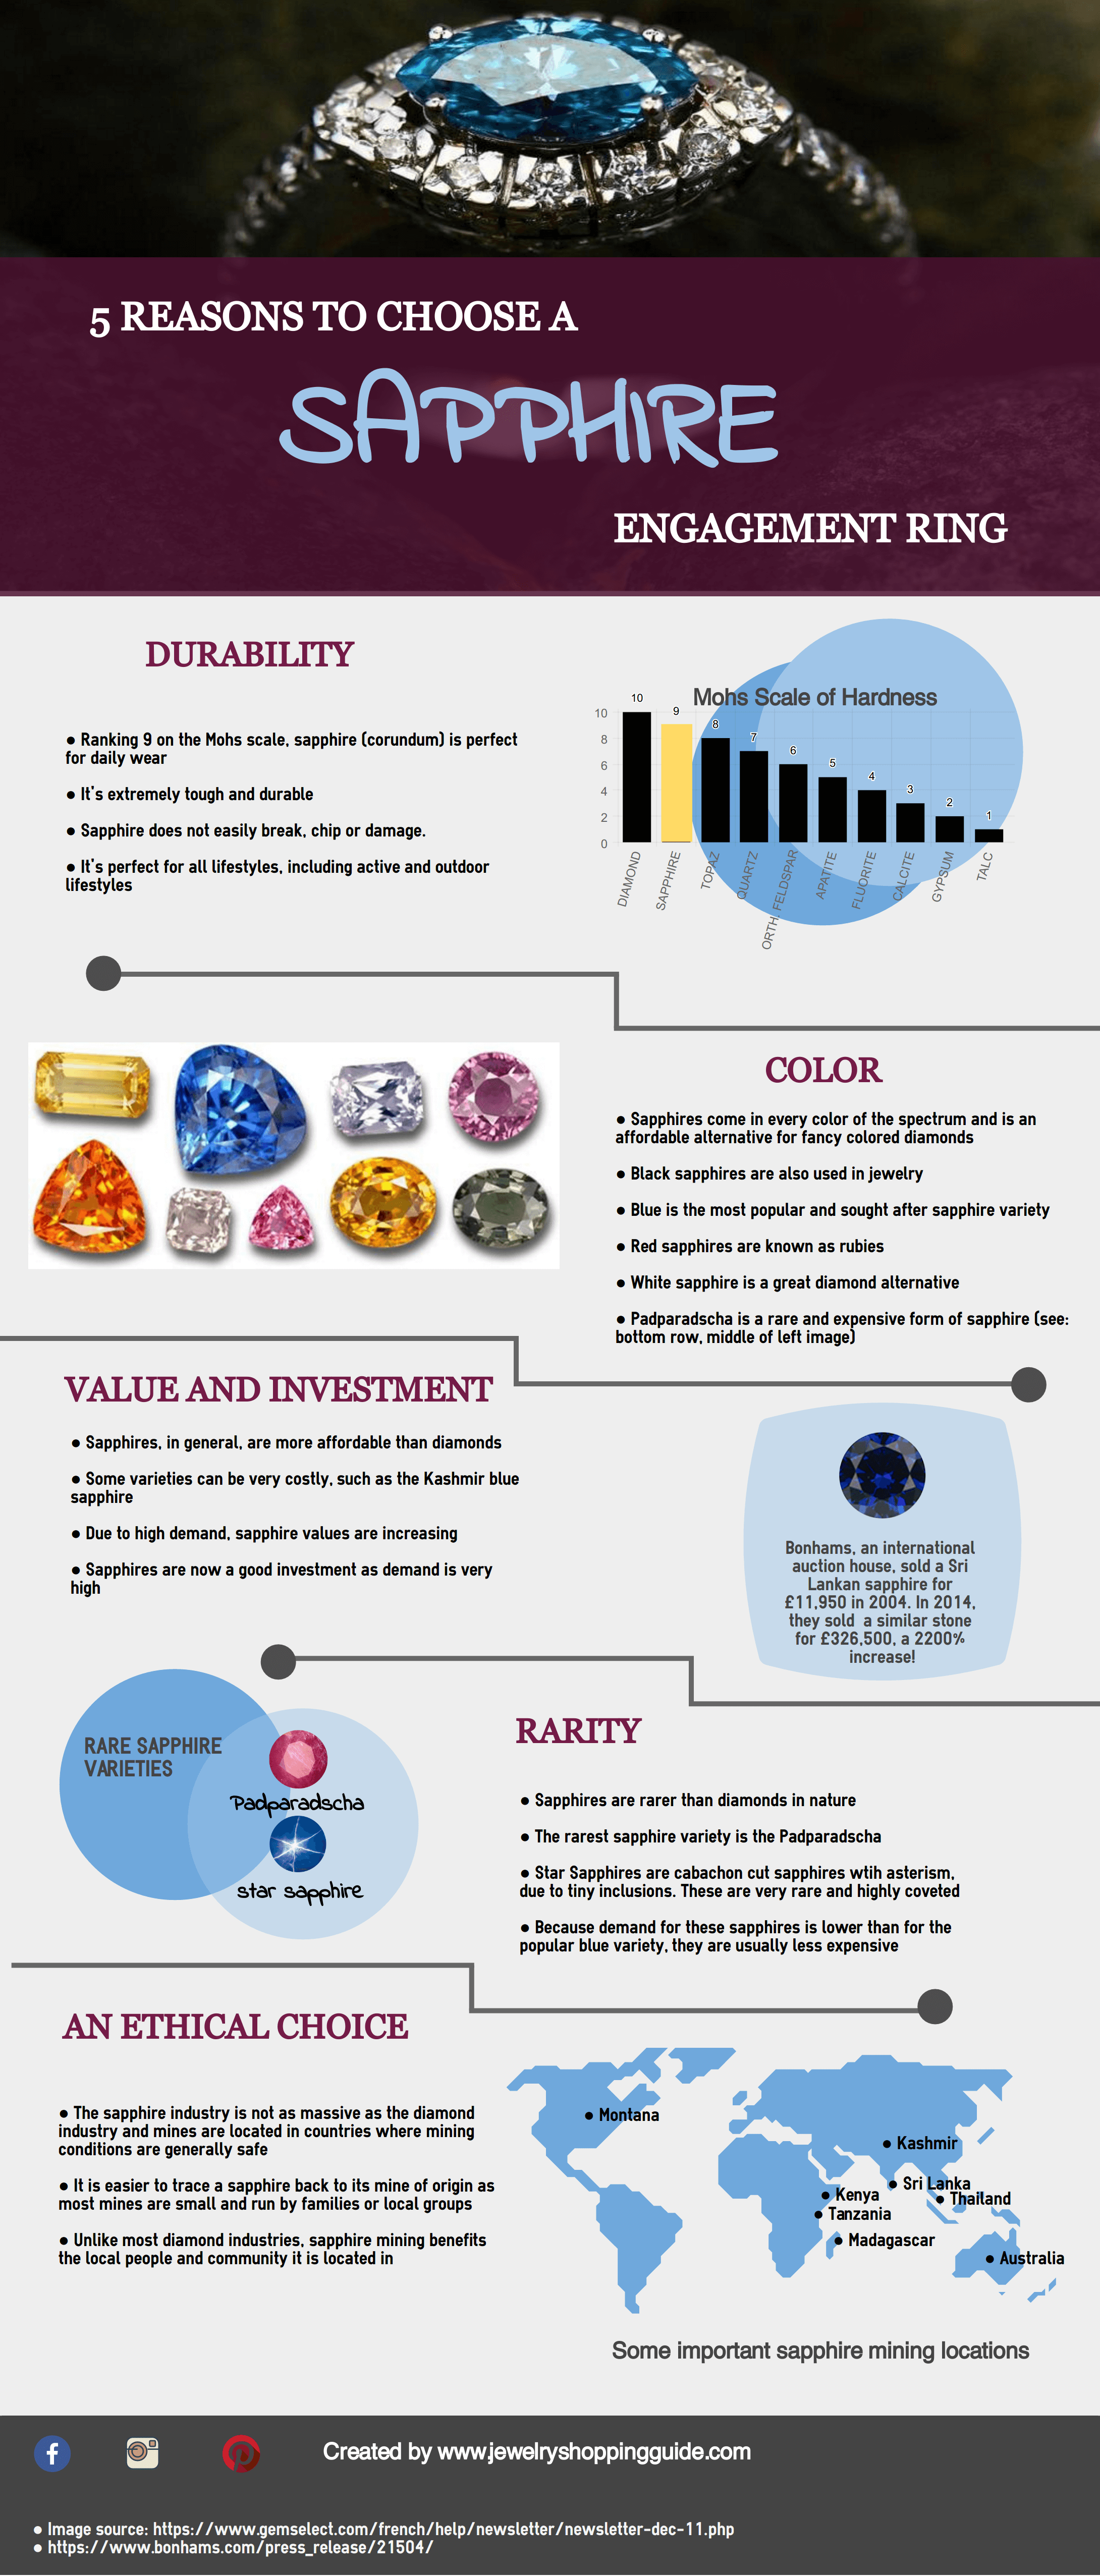 TOP REASONS TO BUY A SAPPHIRE ENGAGEMENT RING INFOGRAPHIC